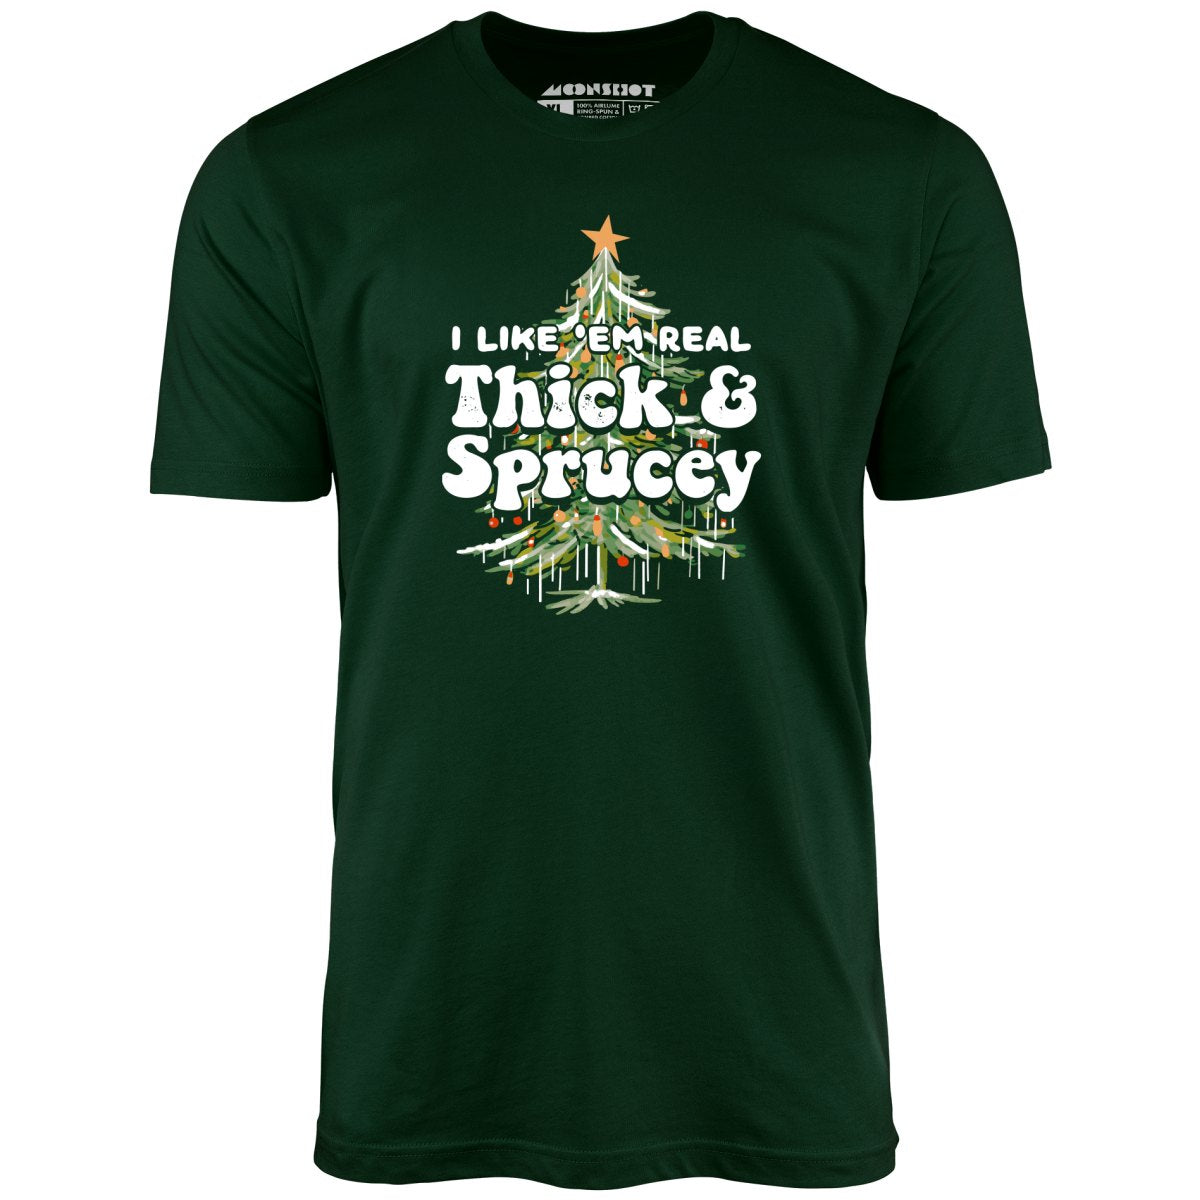 I Like em Real Thick and Sprucey - Unisex T-Shirt